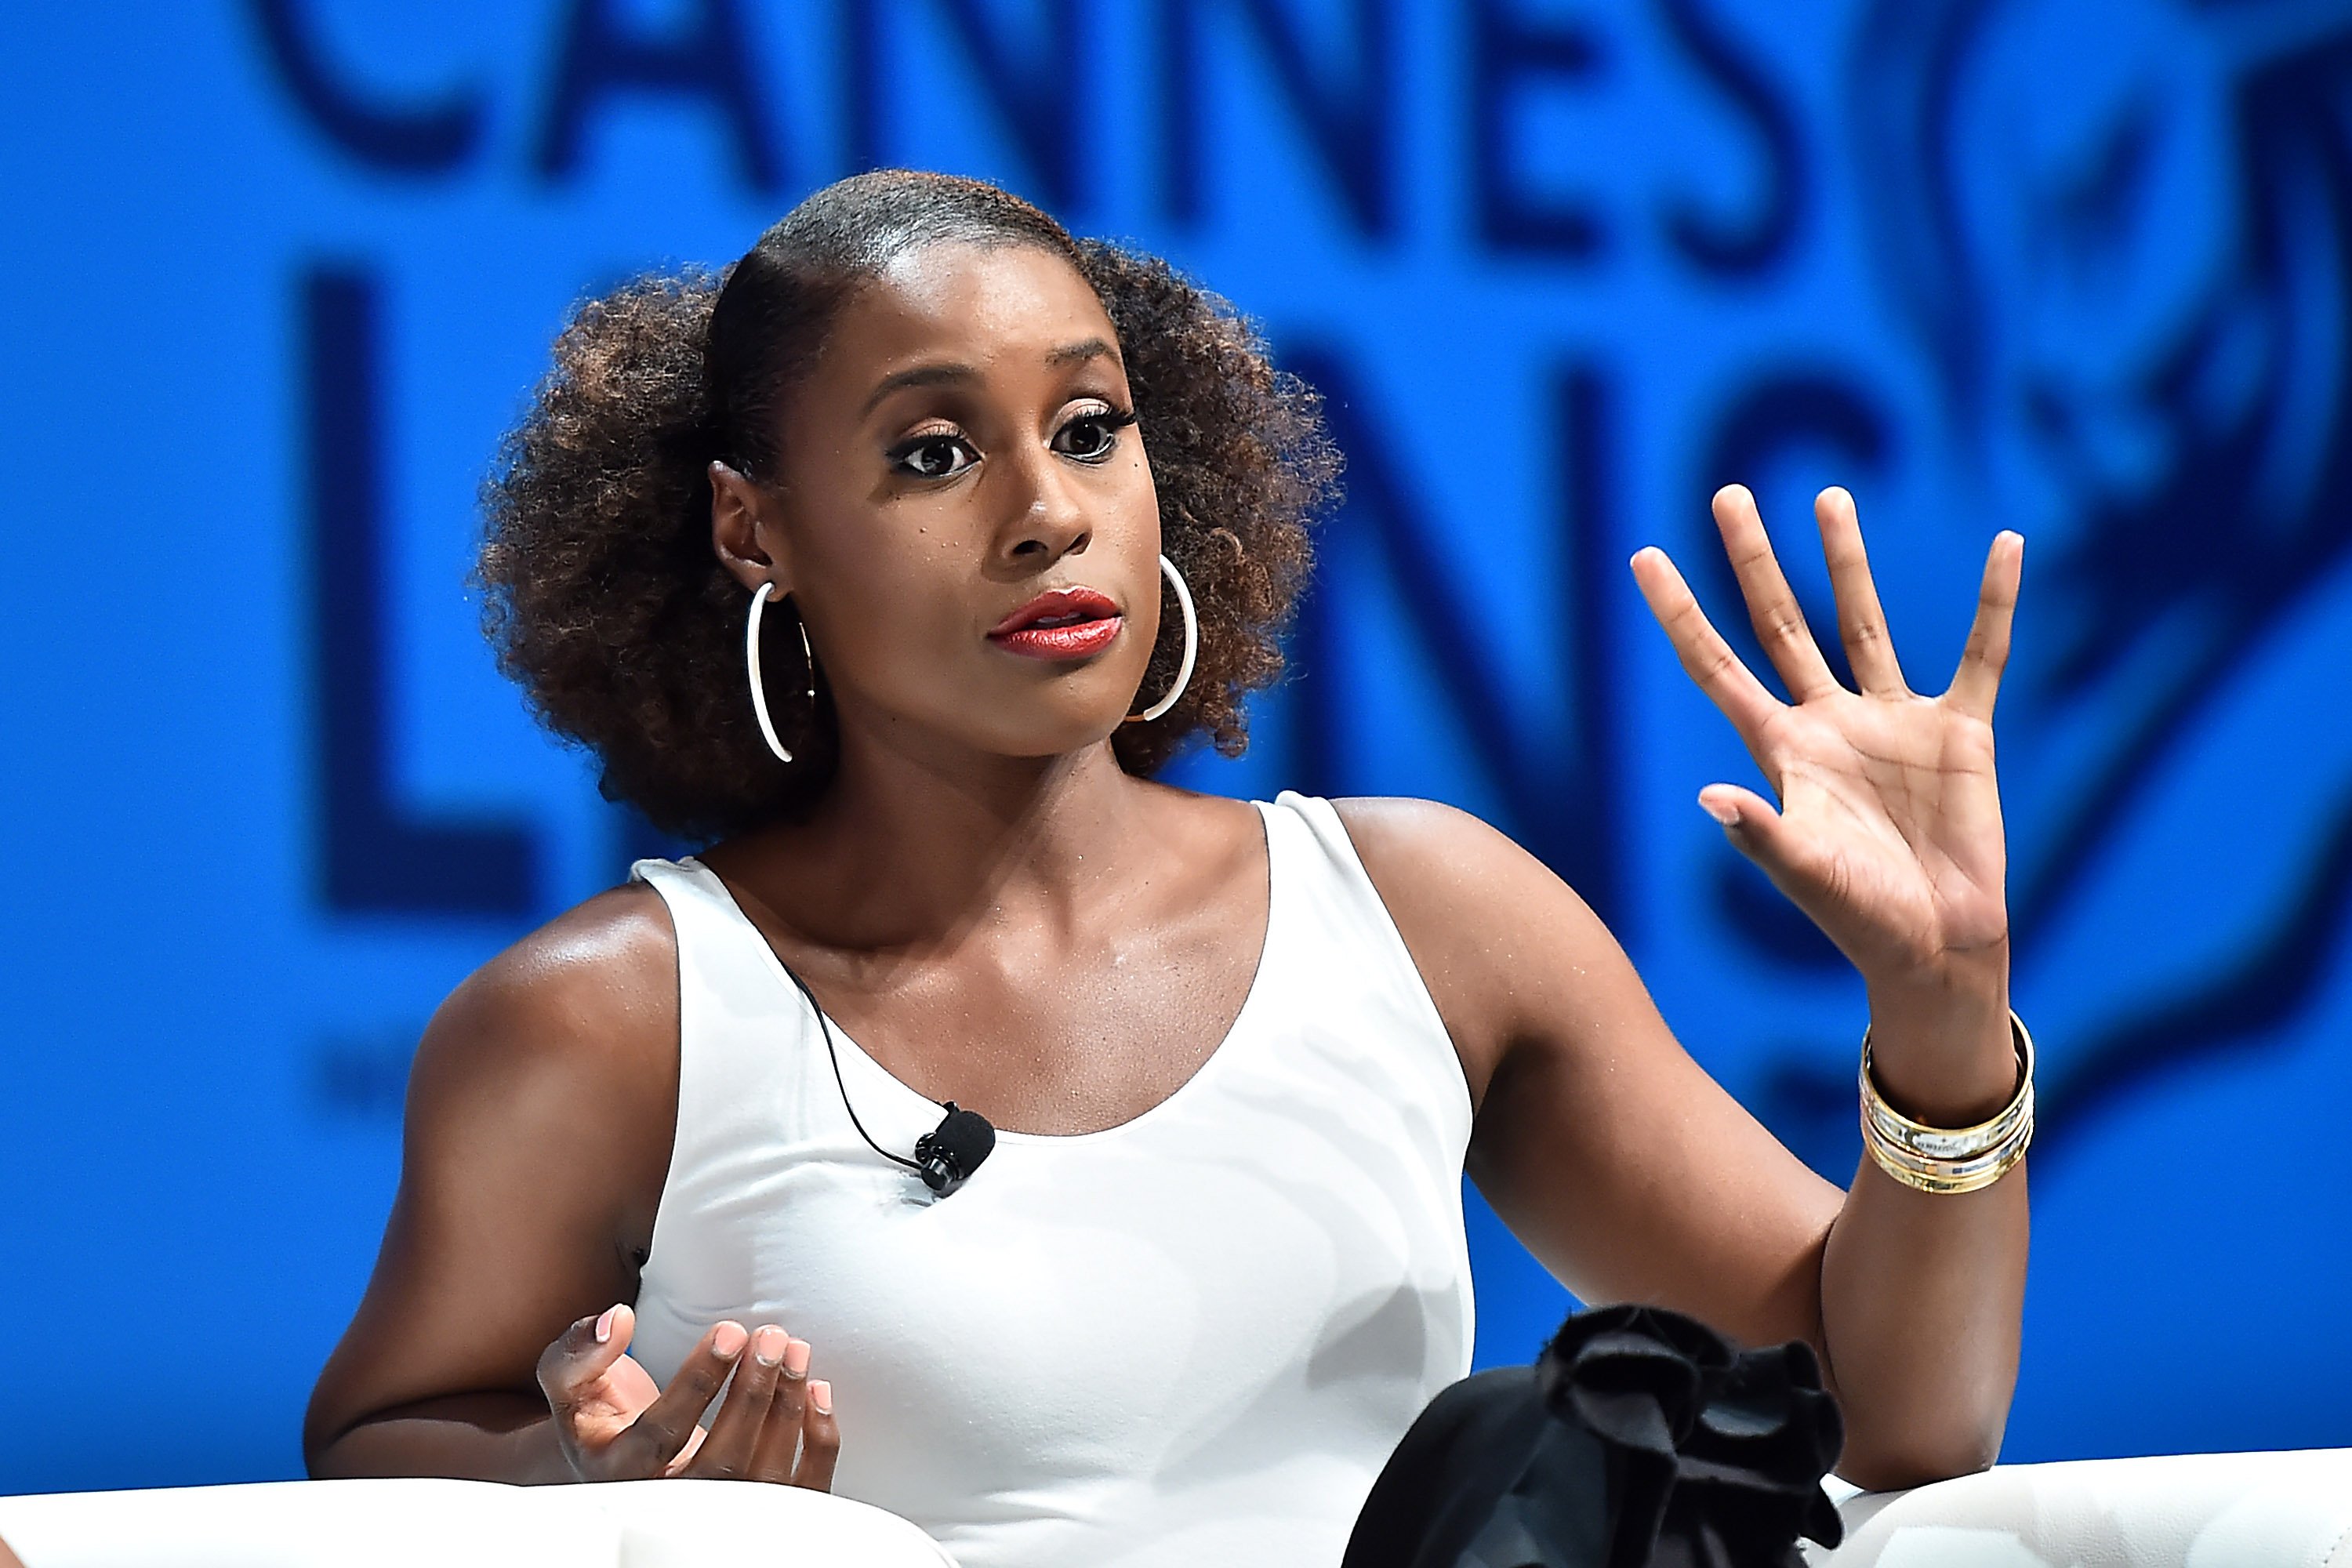 Issa Rae at the Cannes Lions Festival 2018 on June 22, 2018 in Cannes, France | Photo: Getty Images